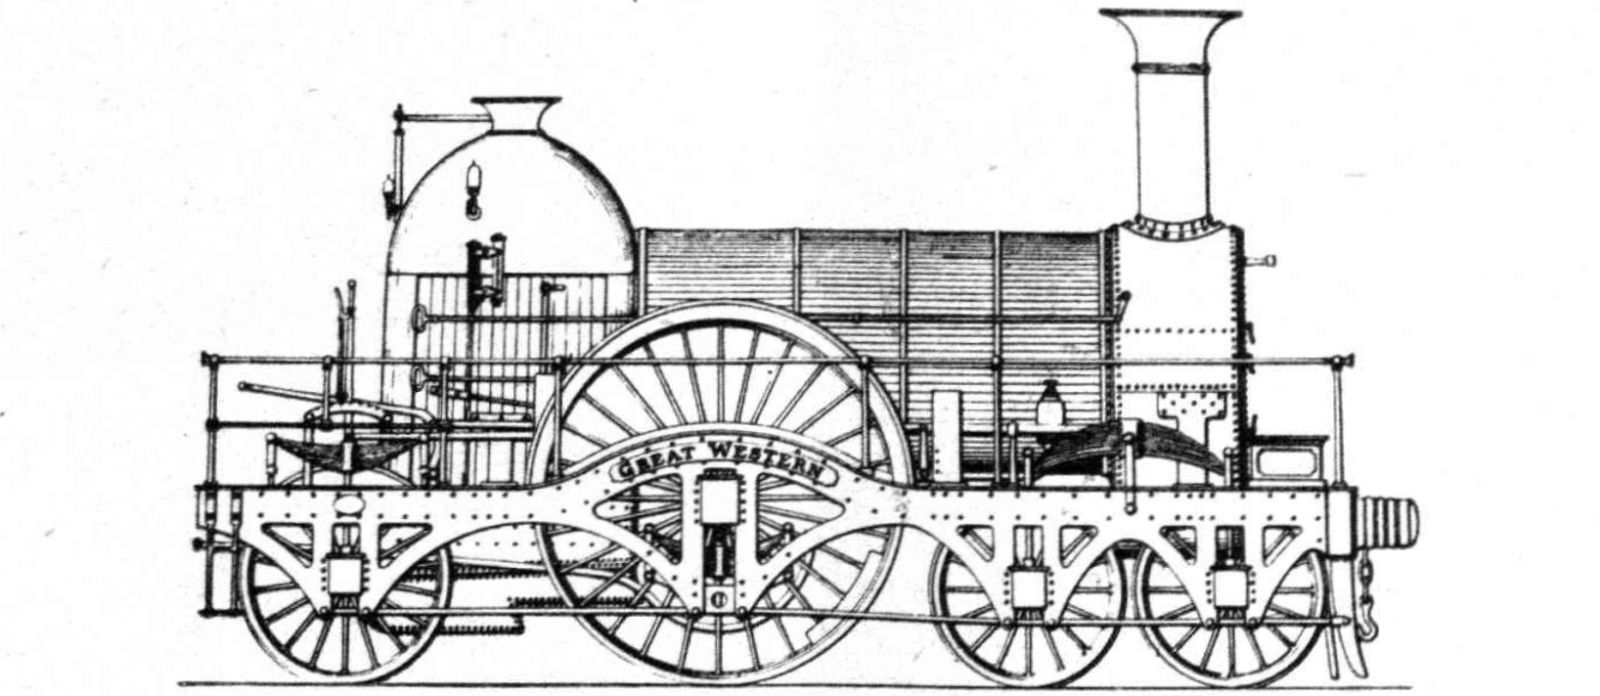 “Great Western” with fixed leading axles